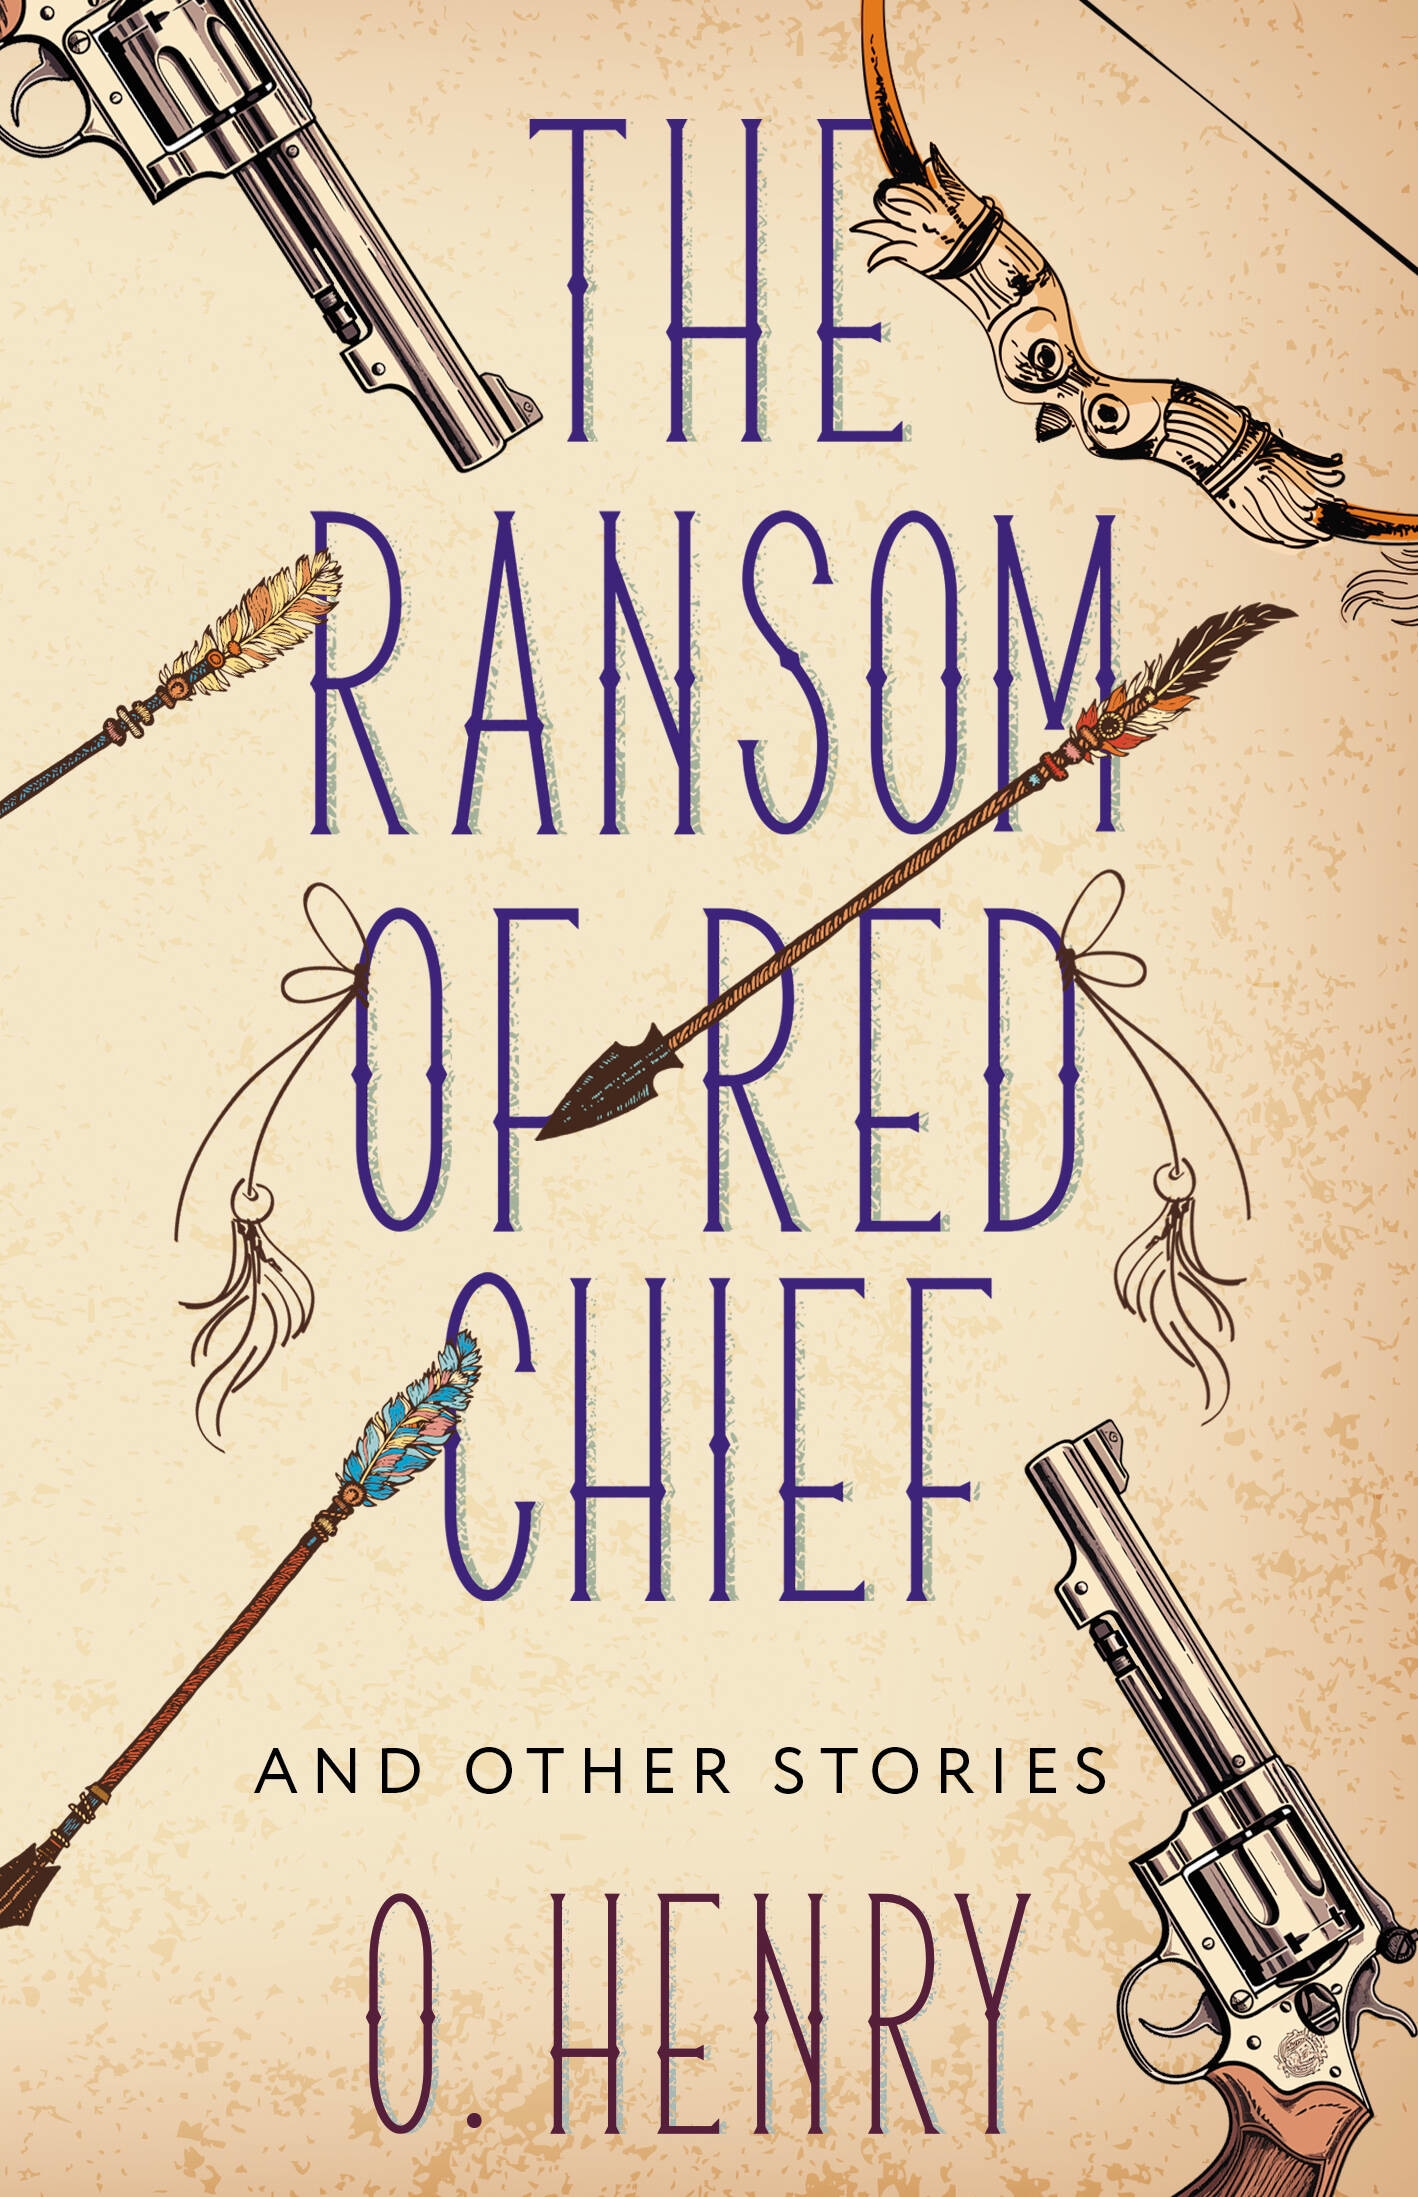 Book “The Ransom of Red Chief and other stories” by О. Генри — 2023